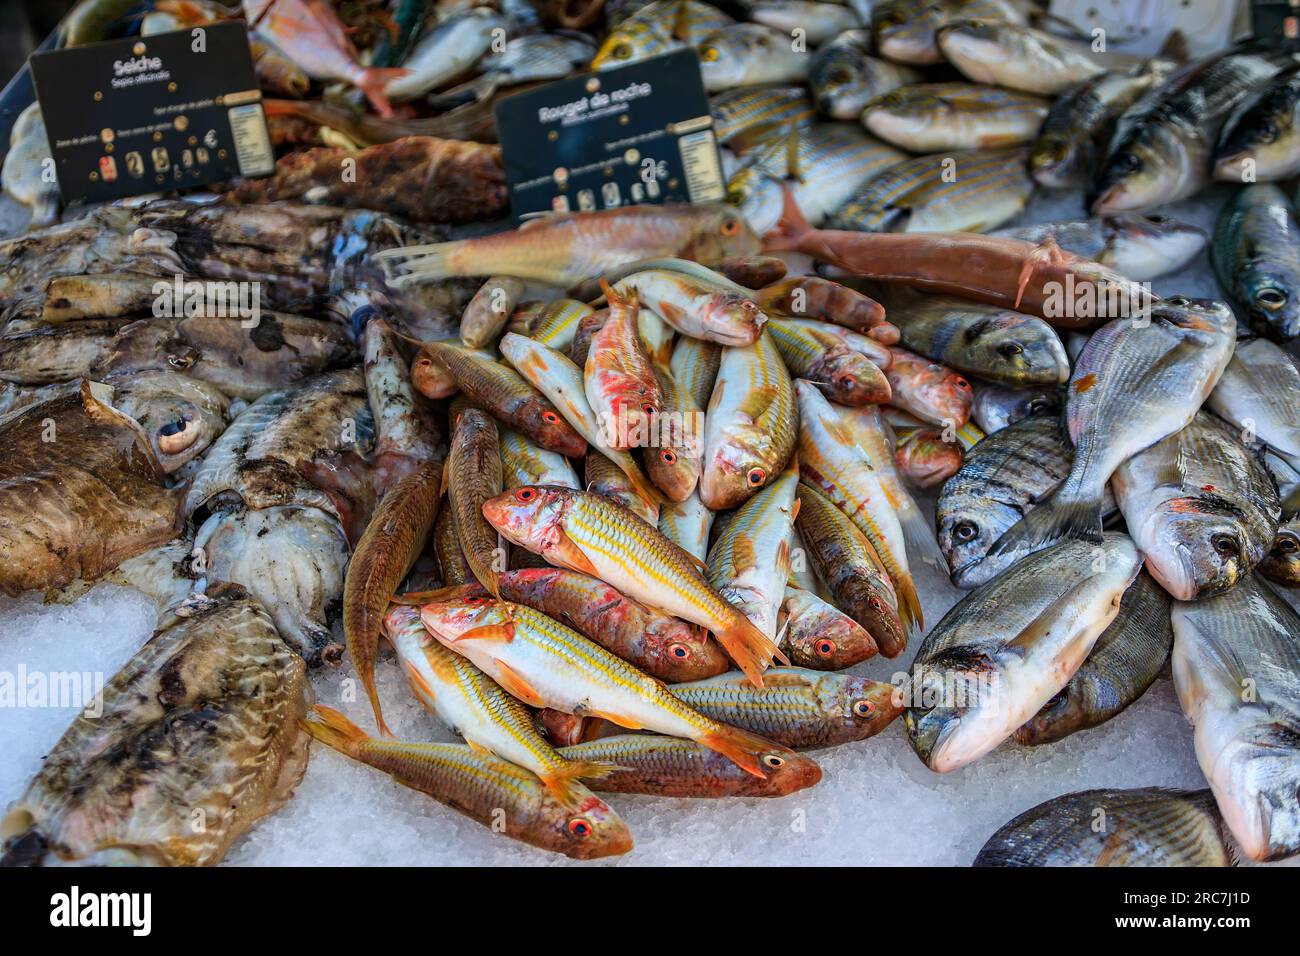 Freshly caught striped red mullet fish on display at the fish market in the old town or Vieil Antibes, South of France Stock Photo